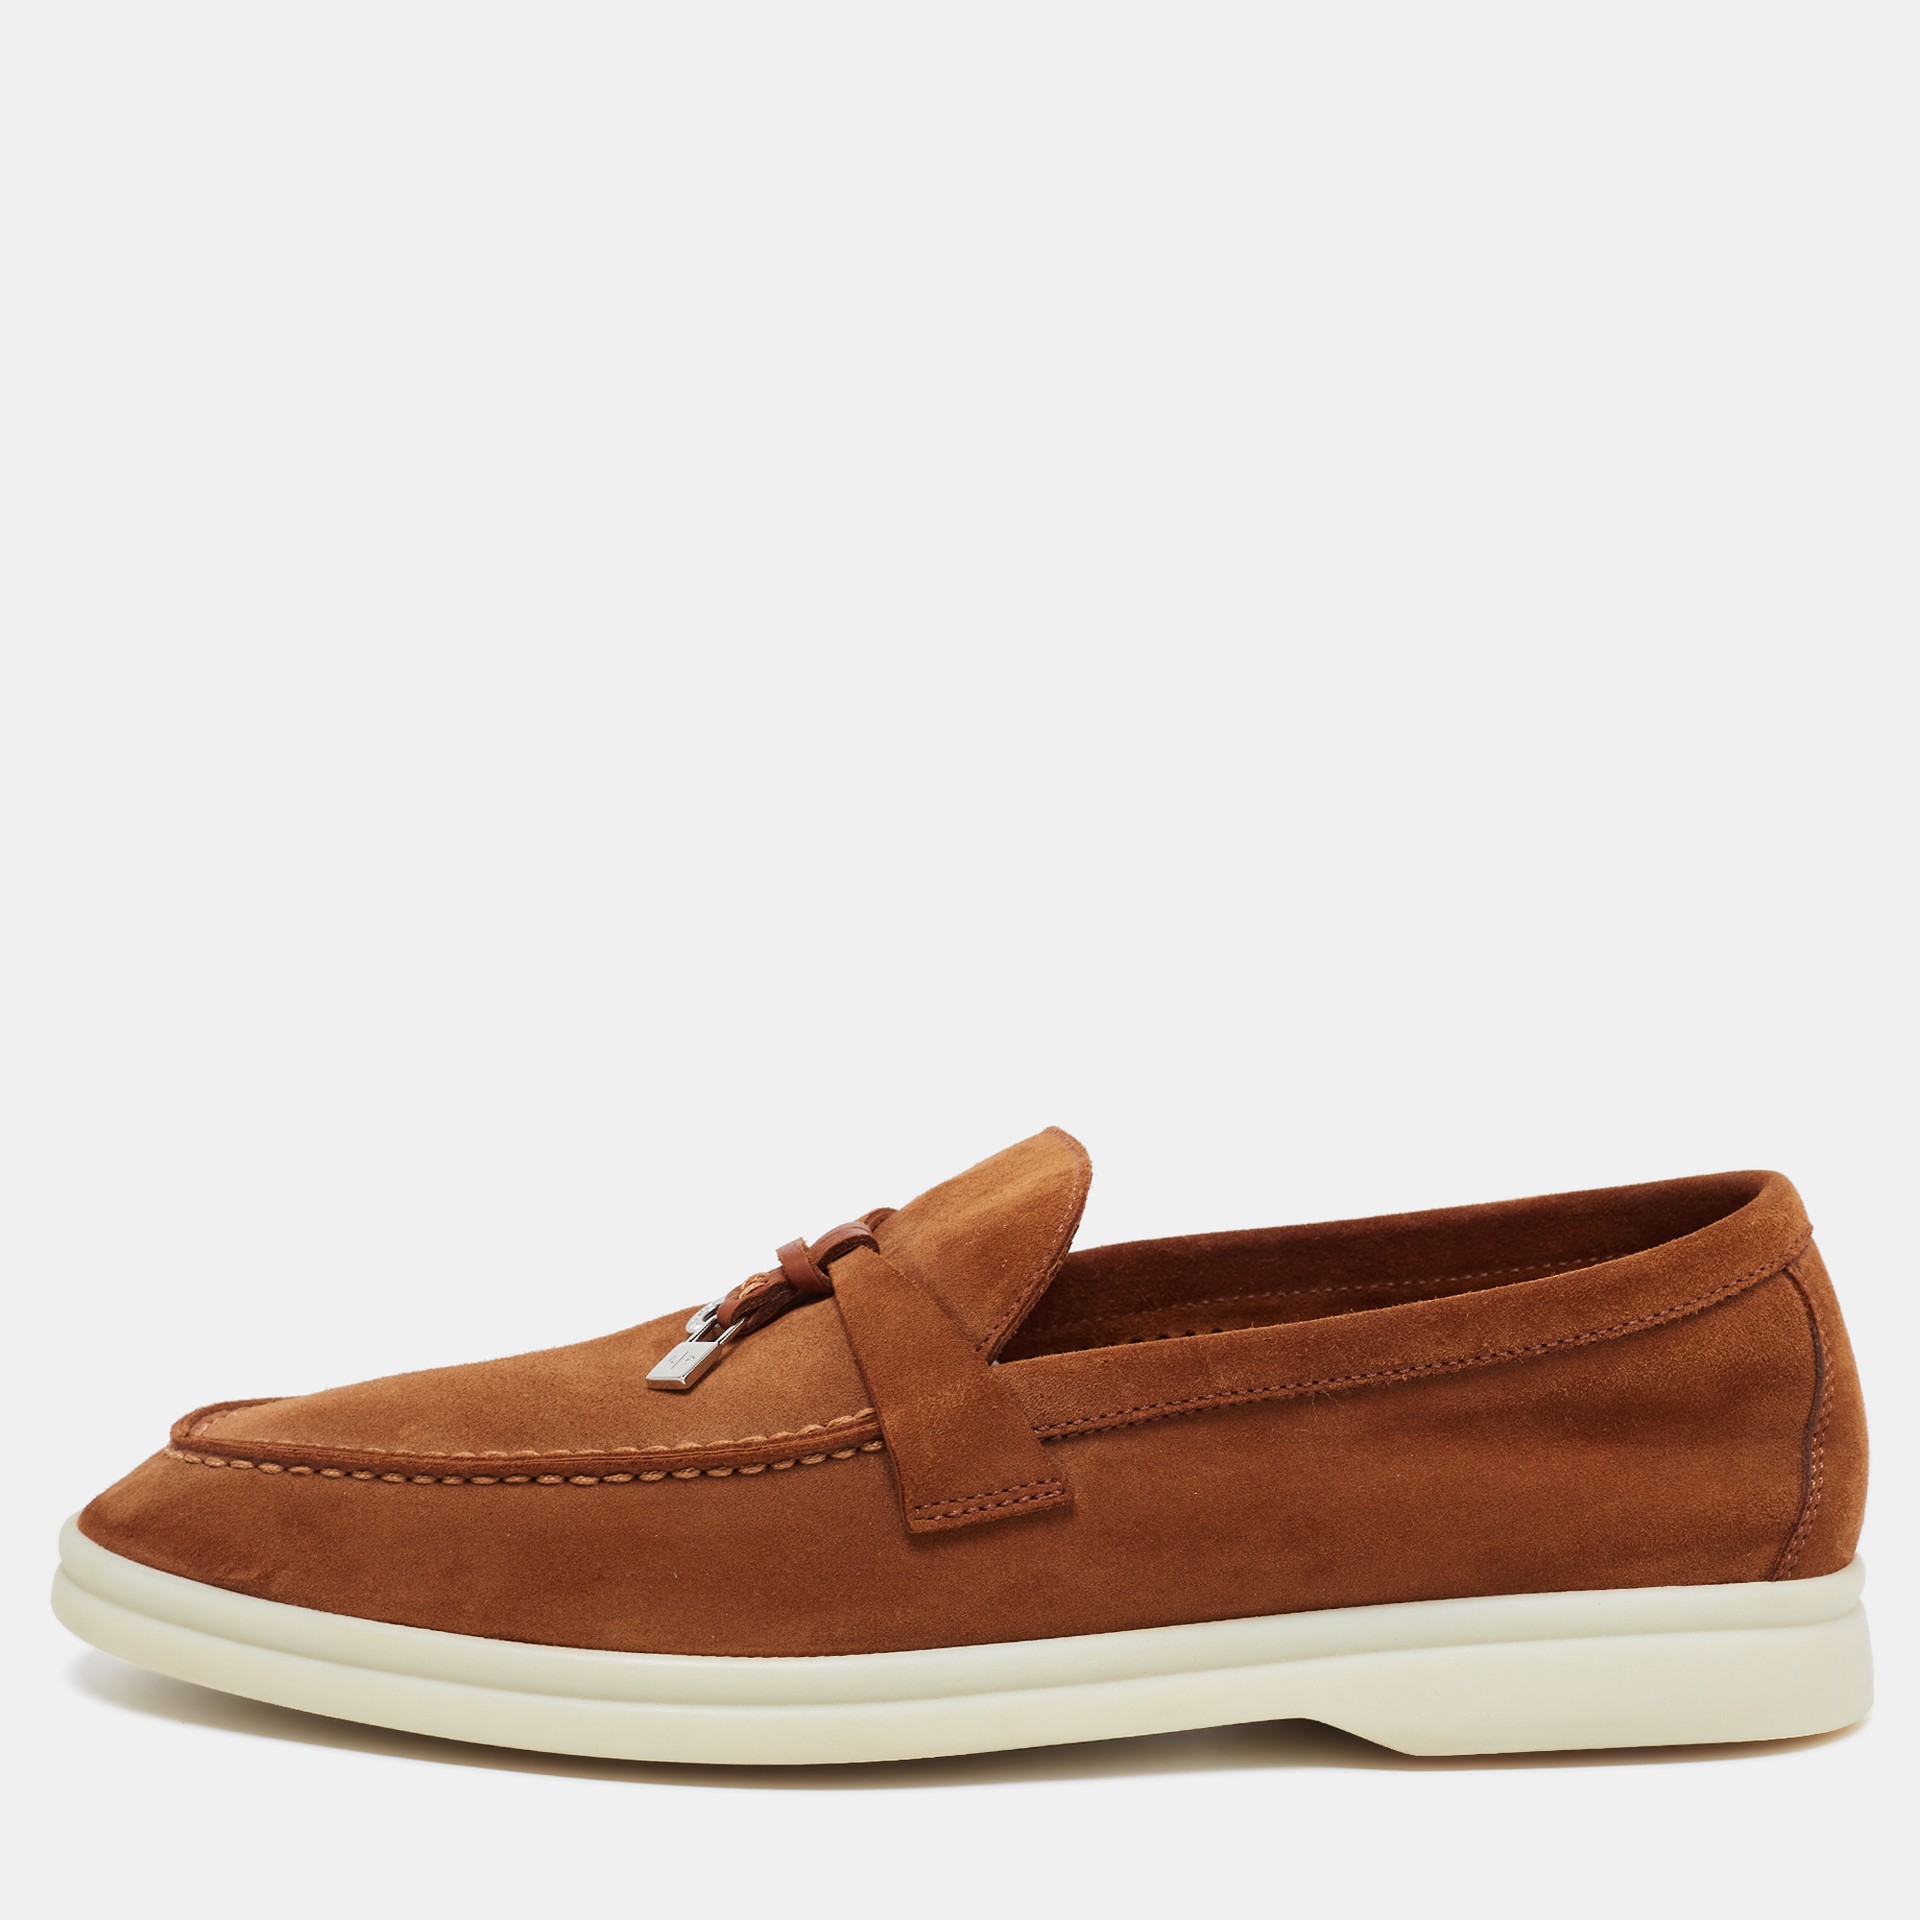 Loro Piana - Summer Charms Walk Moccasin Loafers - Brown